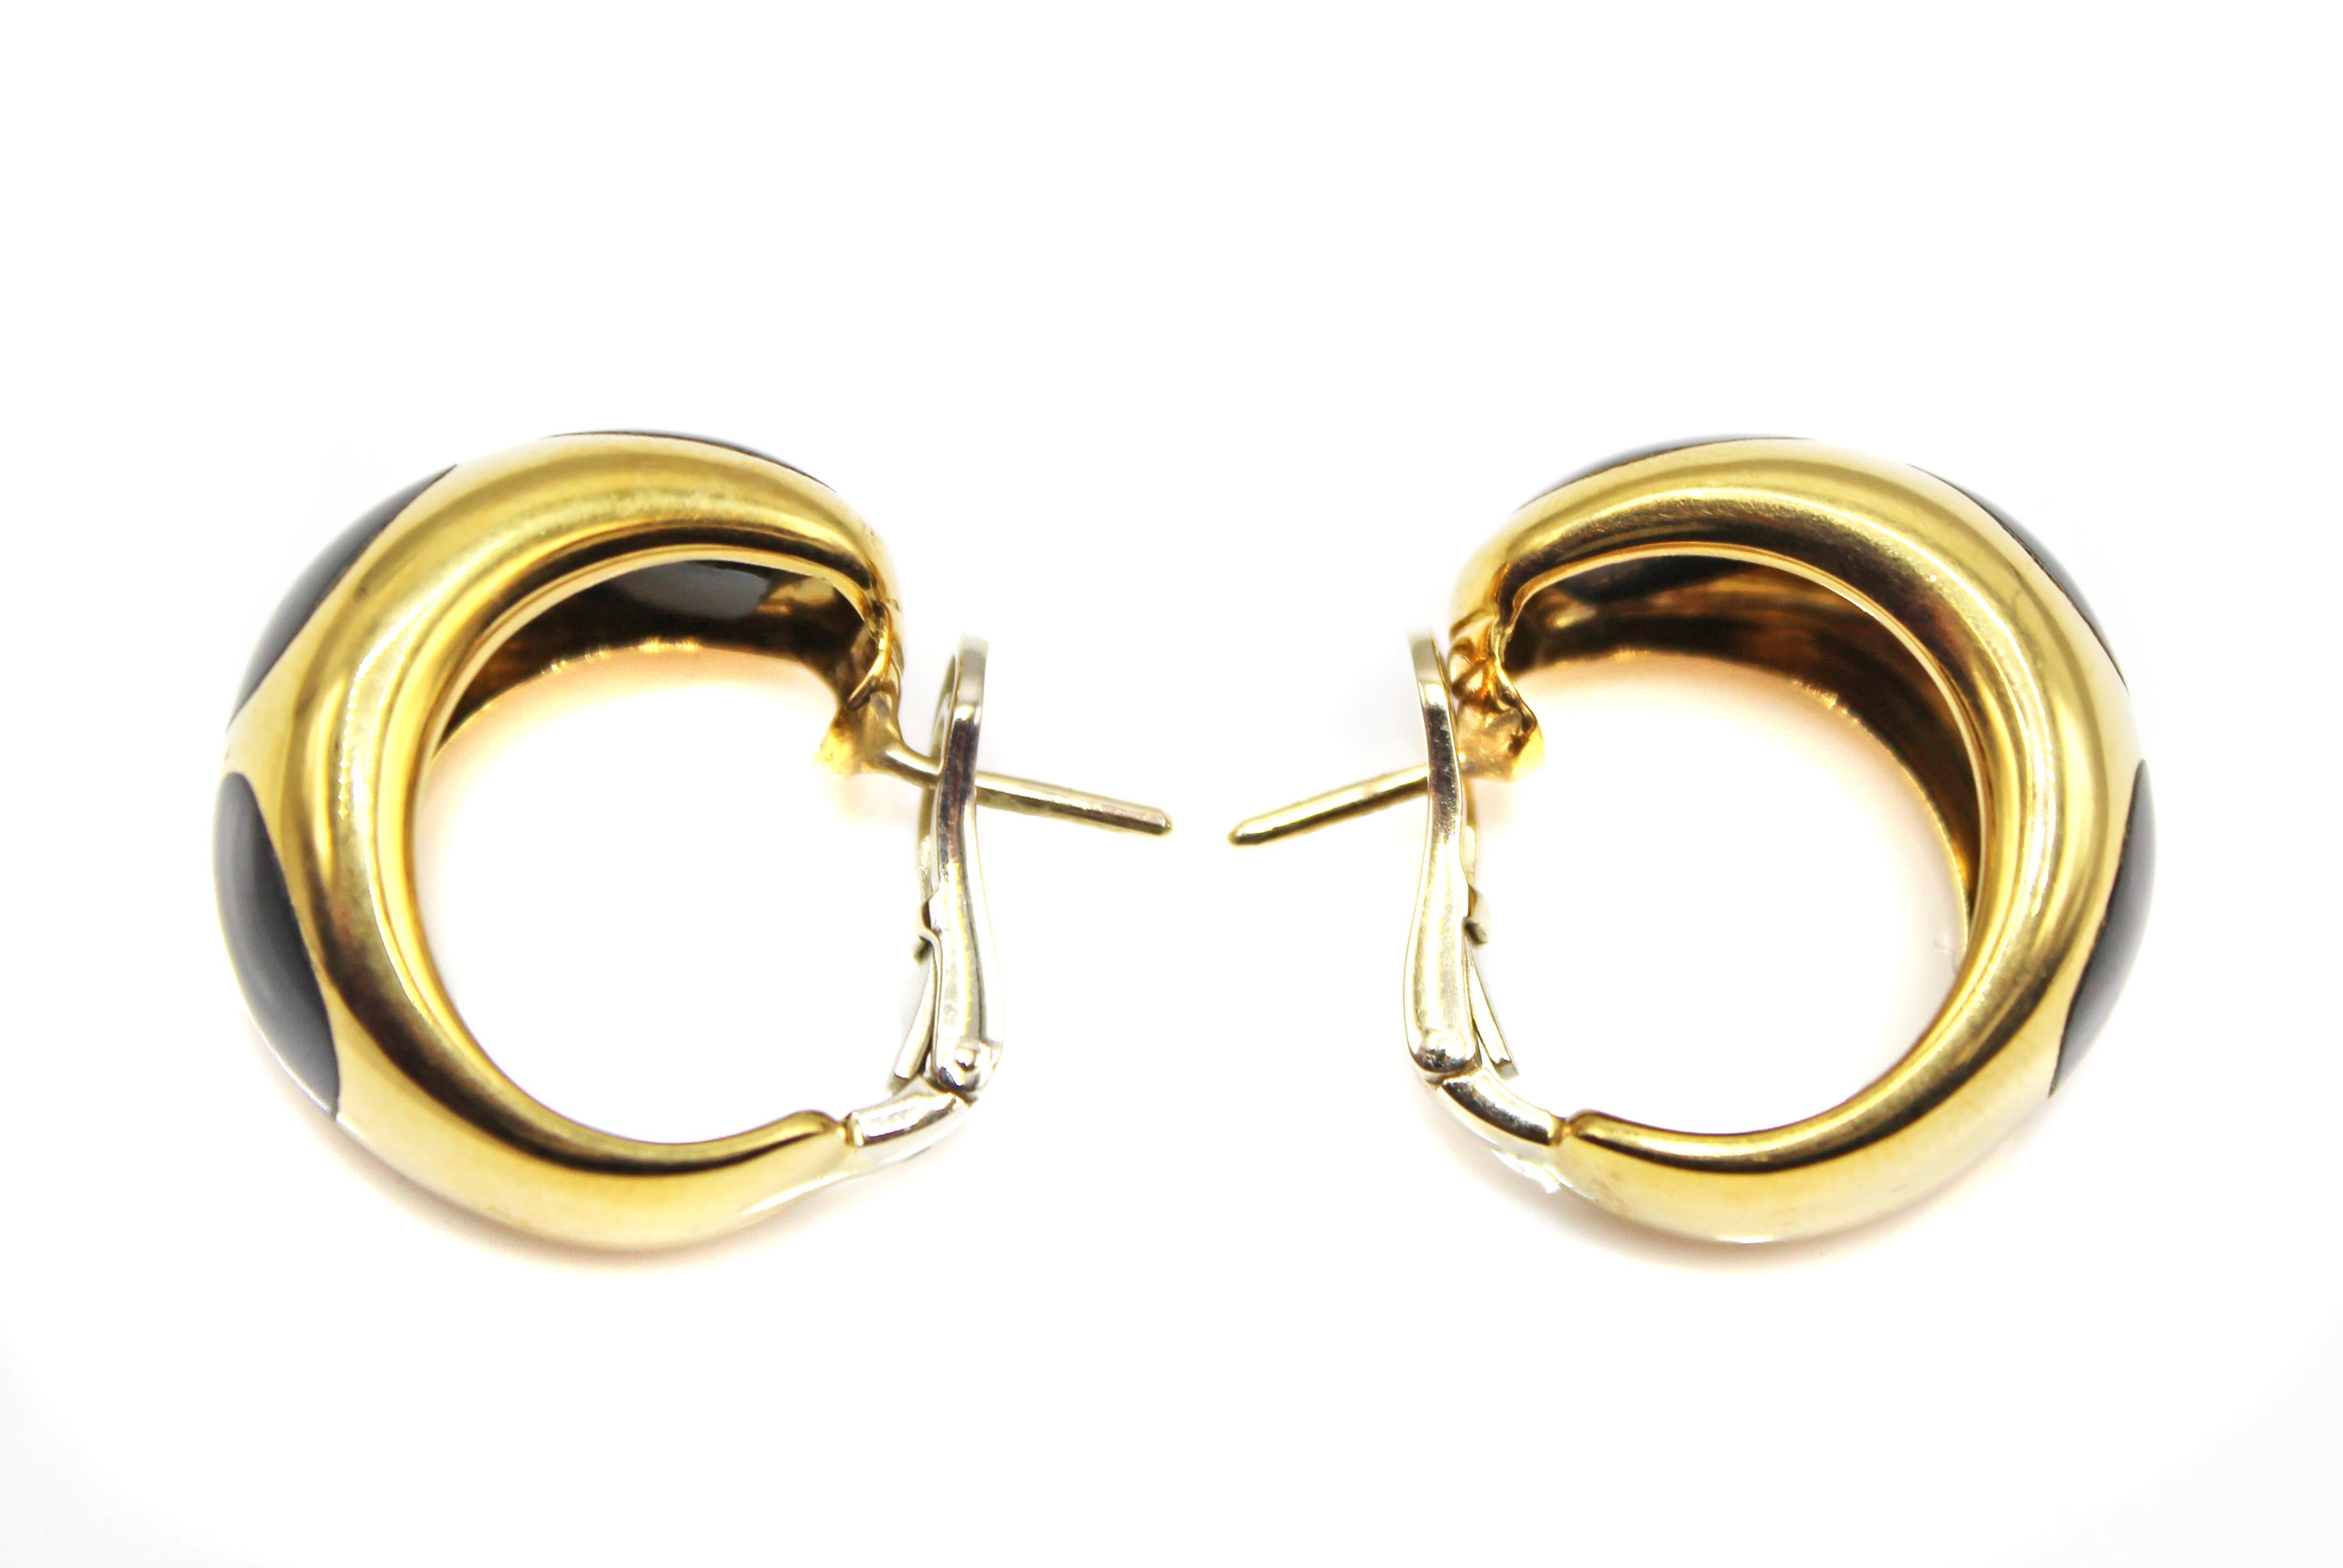 These chic 1980s ear-clips, wonderfully hand-crafted in 18 karat gold have the perfect curve to fit elegantly around the ear-lobe . The polished curved gold has 3 perfectly matched buff-top black onyx carres set flush into them, giving these